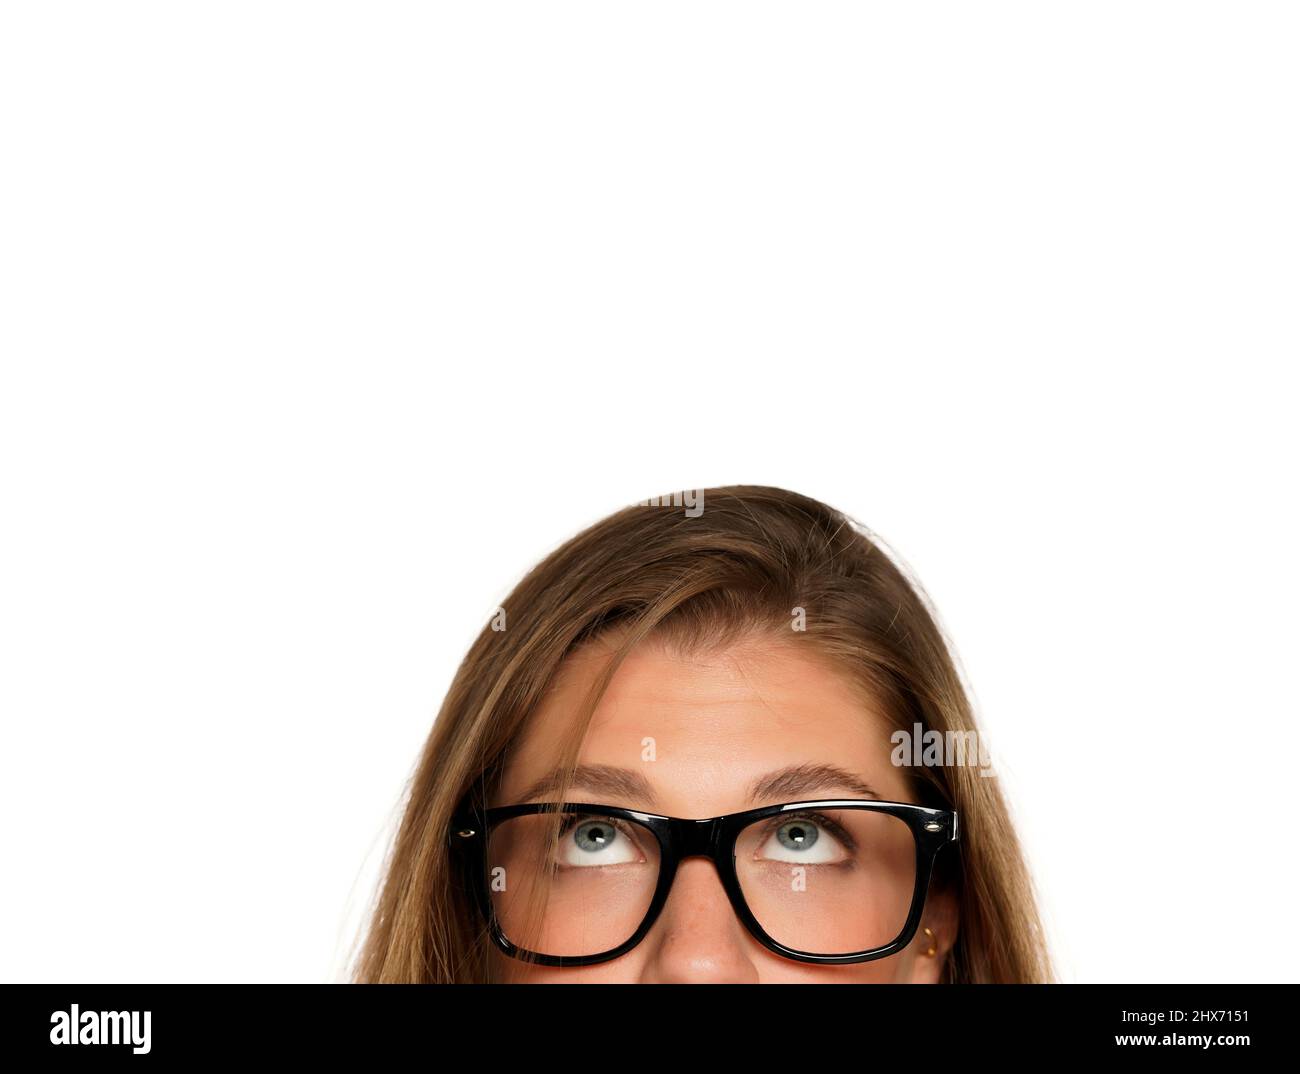 Half portrait of a young puzzled woman with eyeglasses on a white background Stock Photo